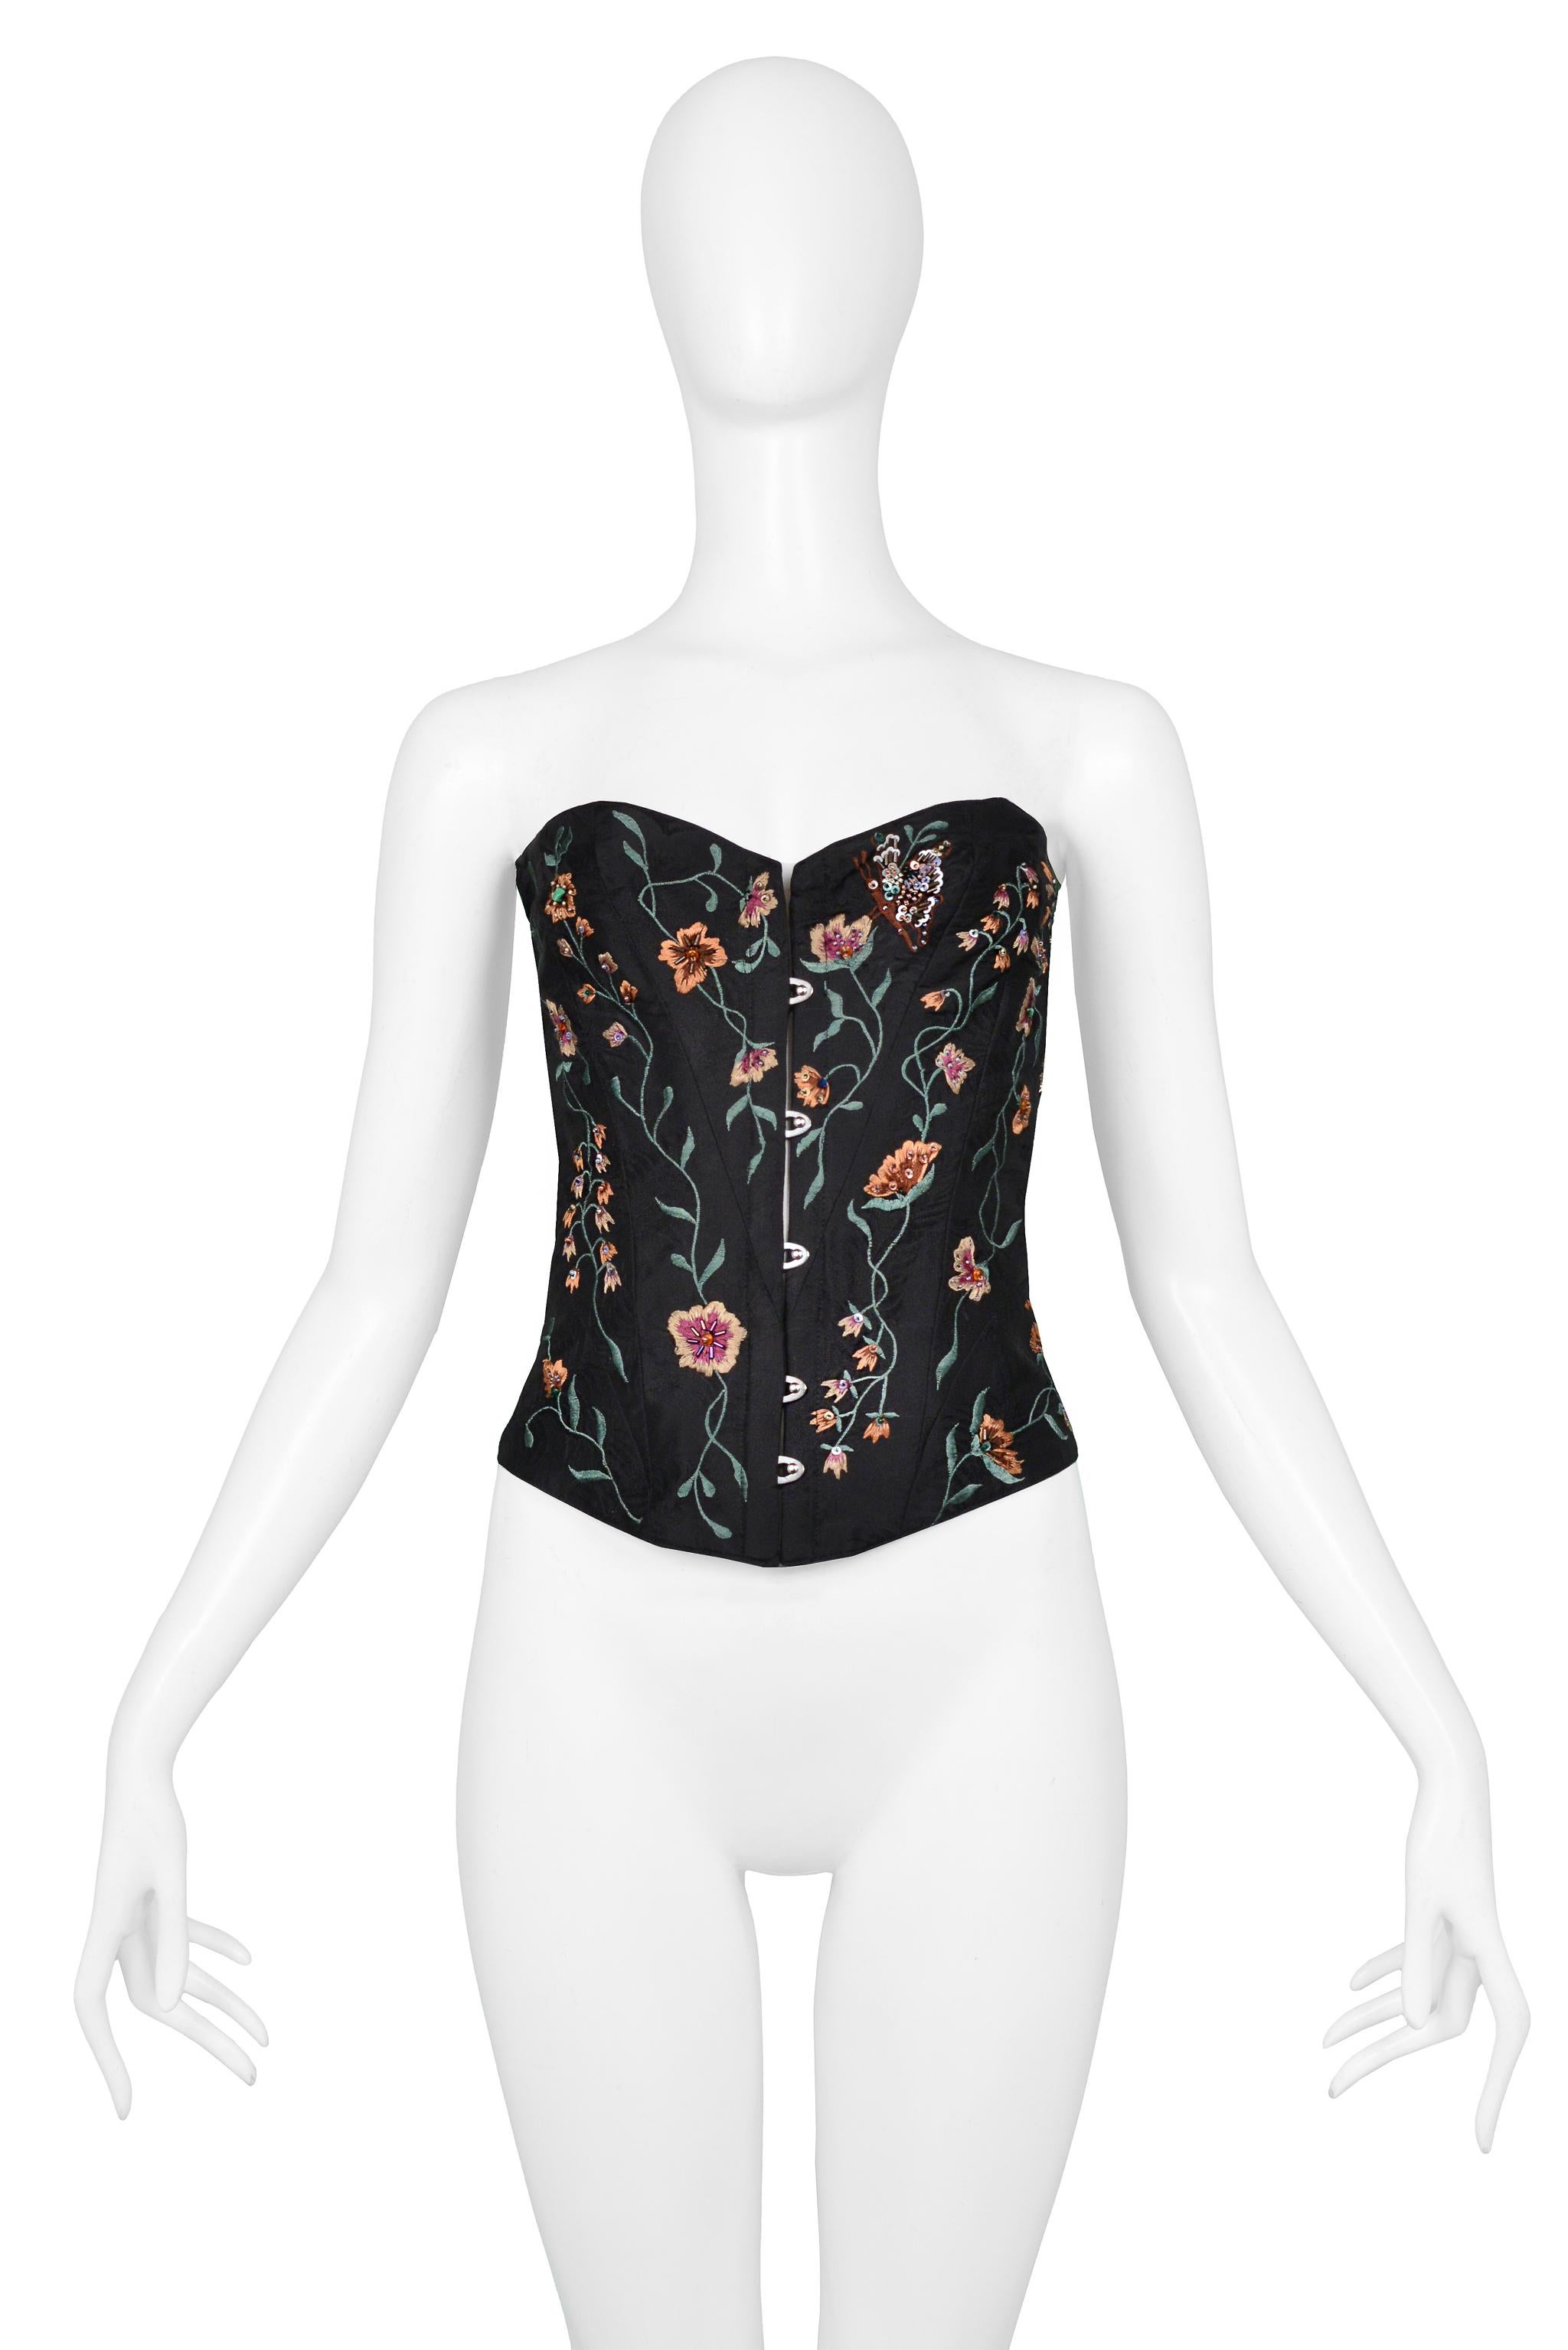 Resurrection Vintage is excited to offer a vintage Lolita Lempicka black bustier corset top with floral embroidery, beading and black satin ribbon laces in the back, and silk lining. 

Lolita Lempicka, Paris
Size: 42
Silk
2000 Runway